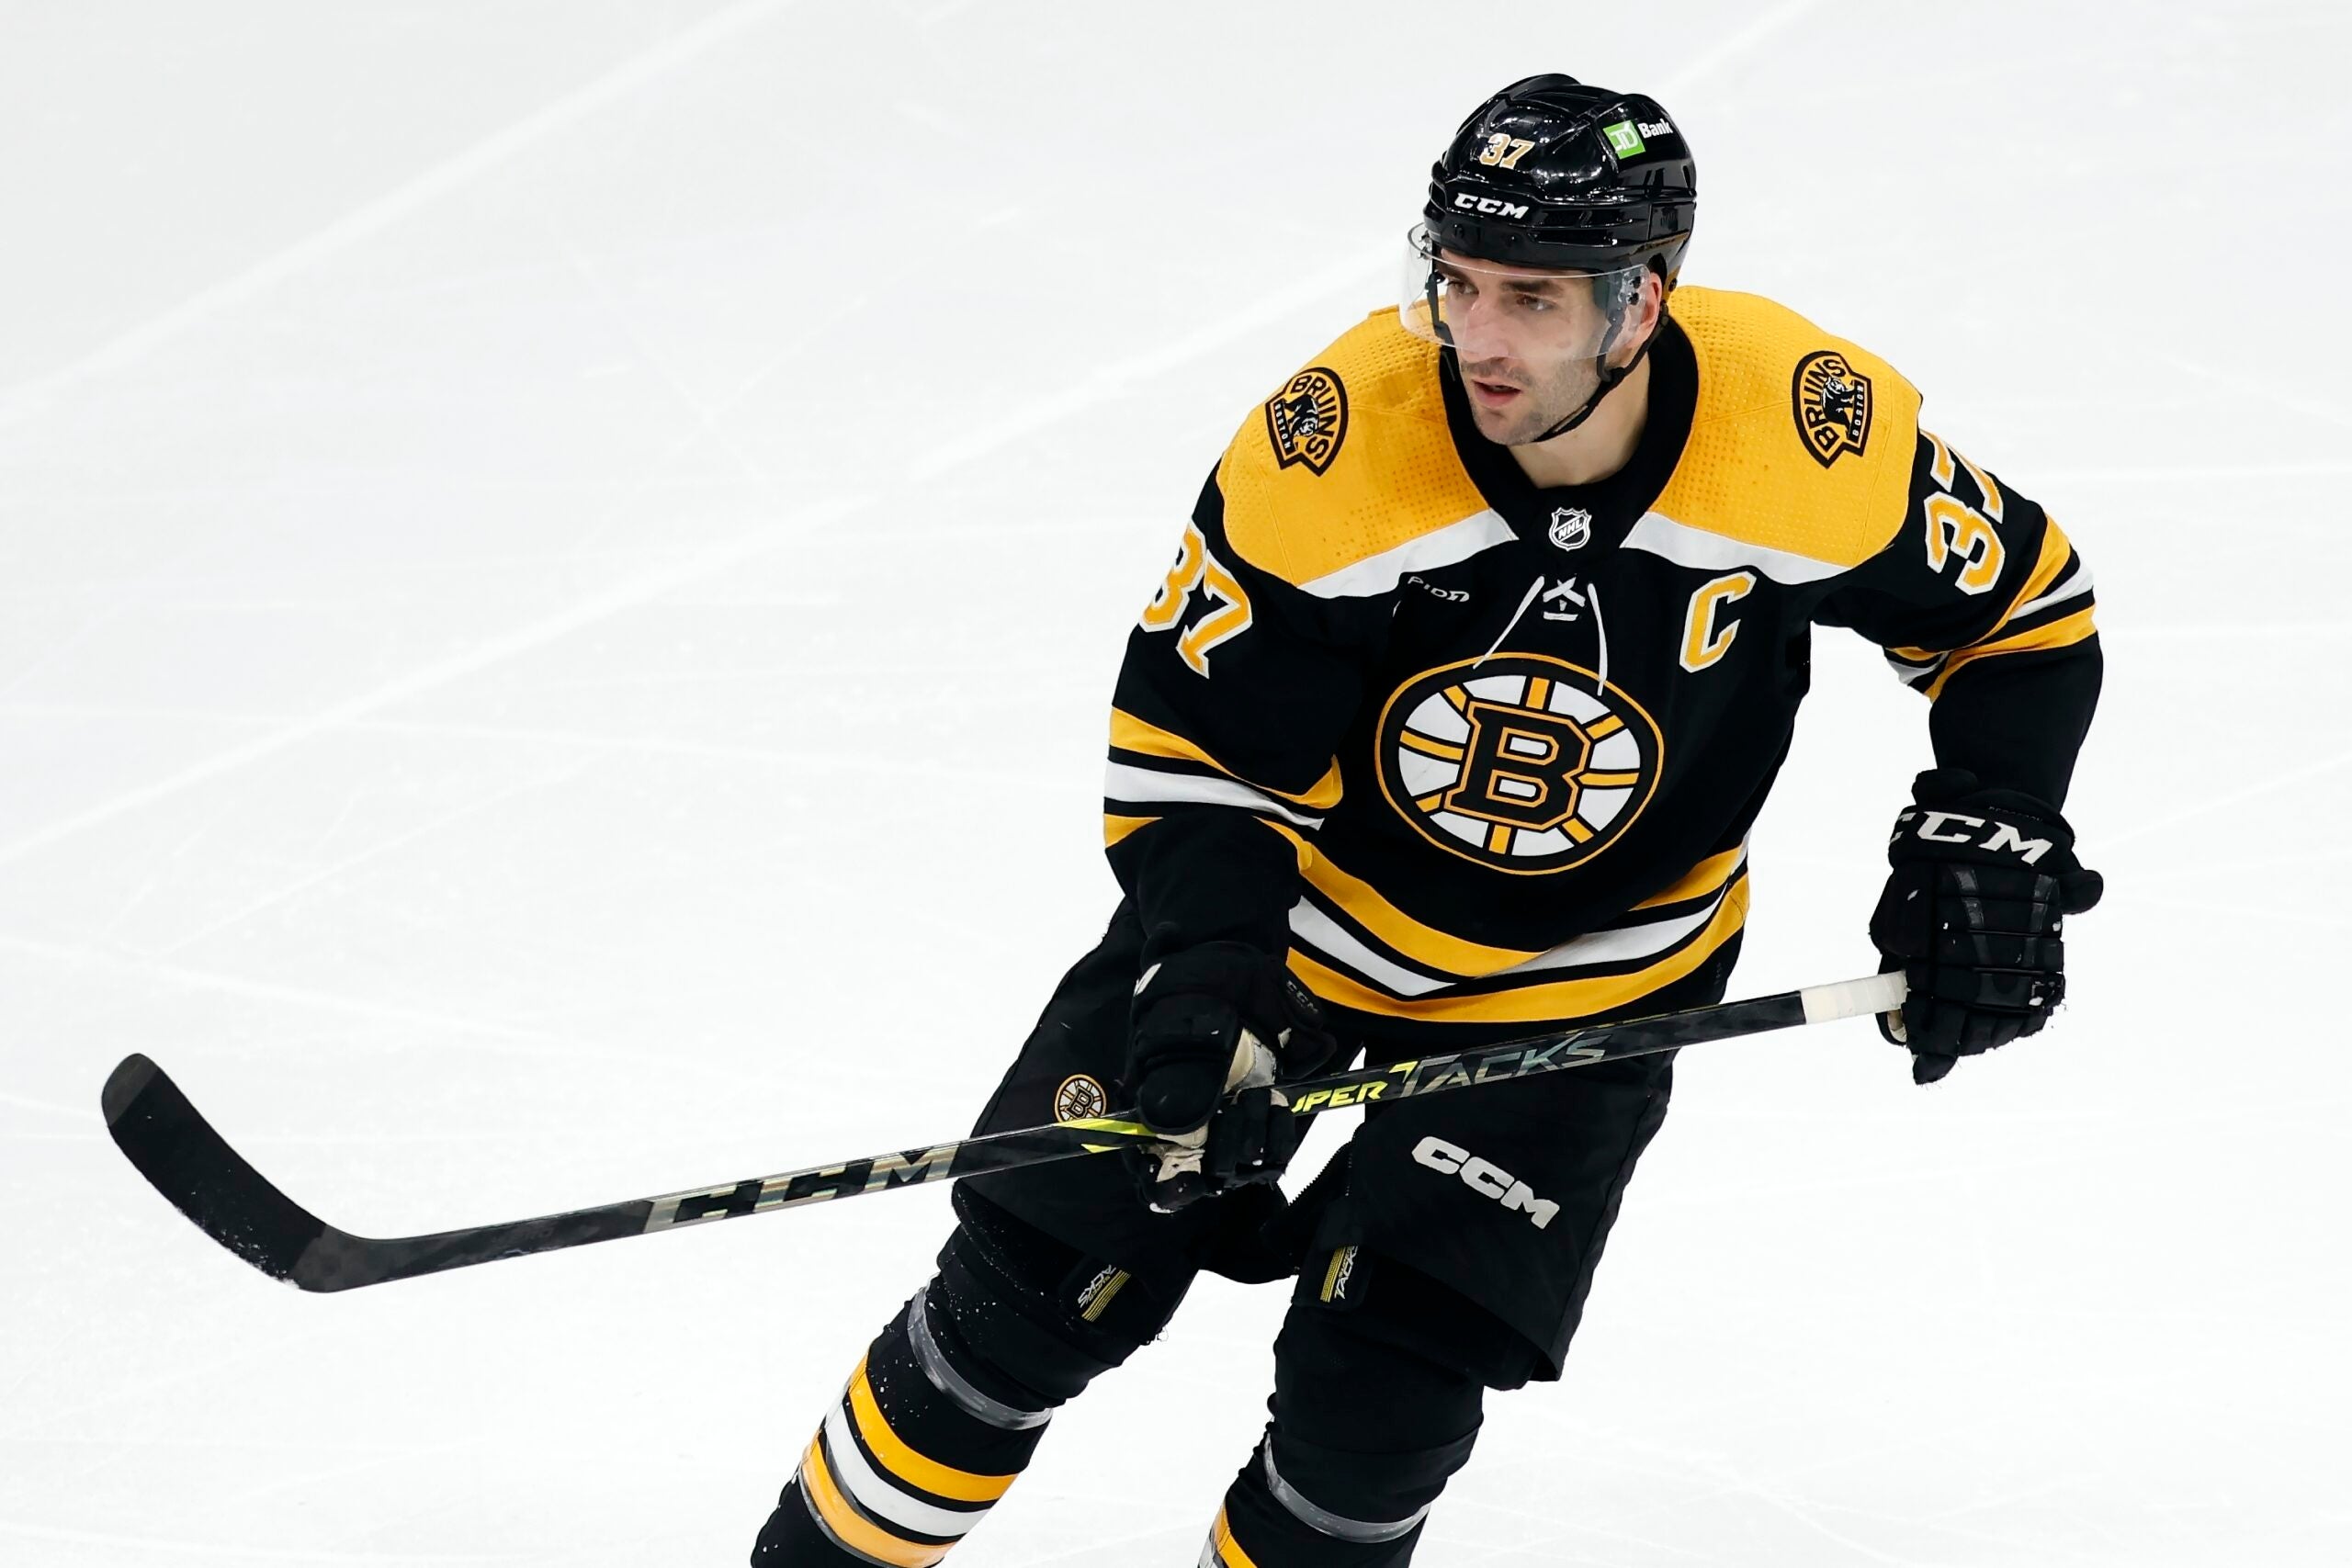 Boston Bruins' Patrice Bergeron plays against the Tampa Bay Lightning during the second period of an NHL hockey game, Saturday, March 25, 2023, in Boston. (AP Photo/Michael Dwyer)